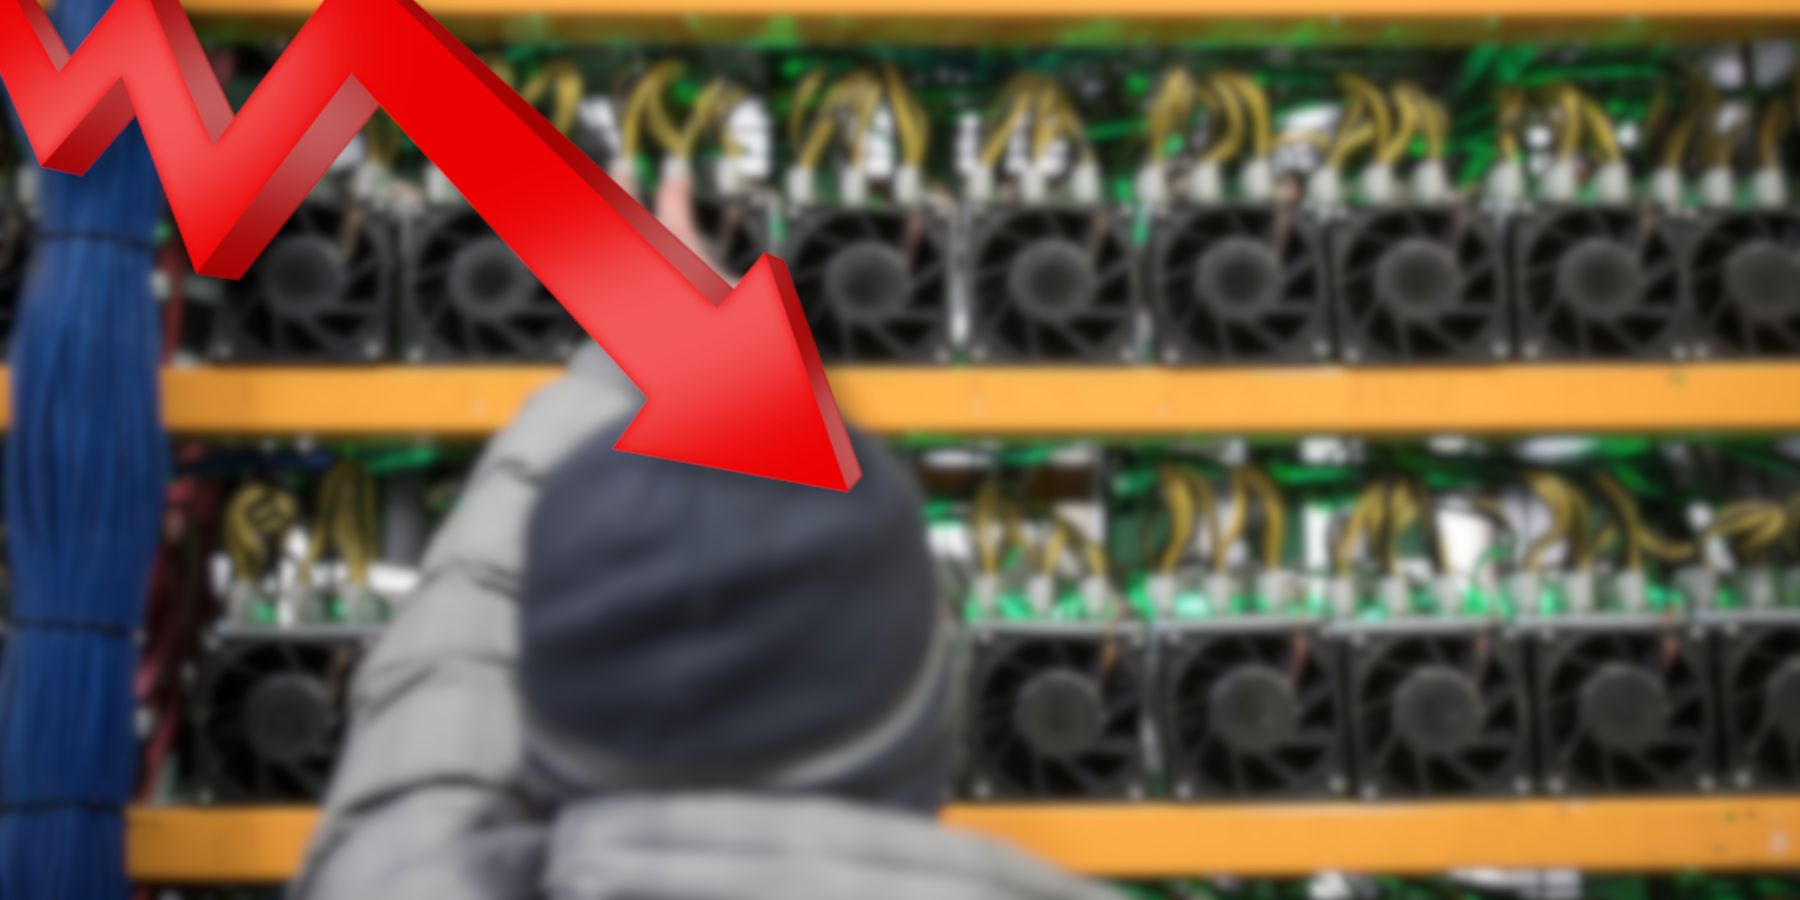 Image showing someone in front of a GPU mining farm with a red arrow pointing down.